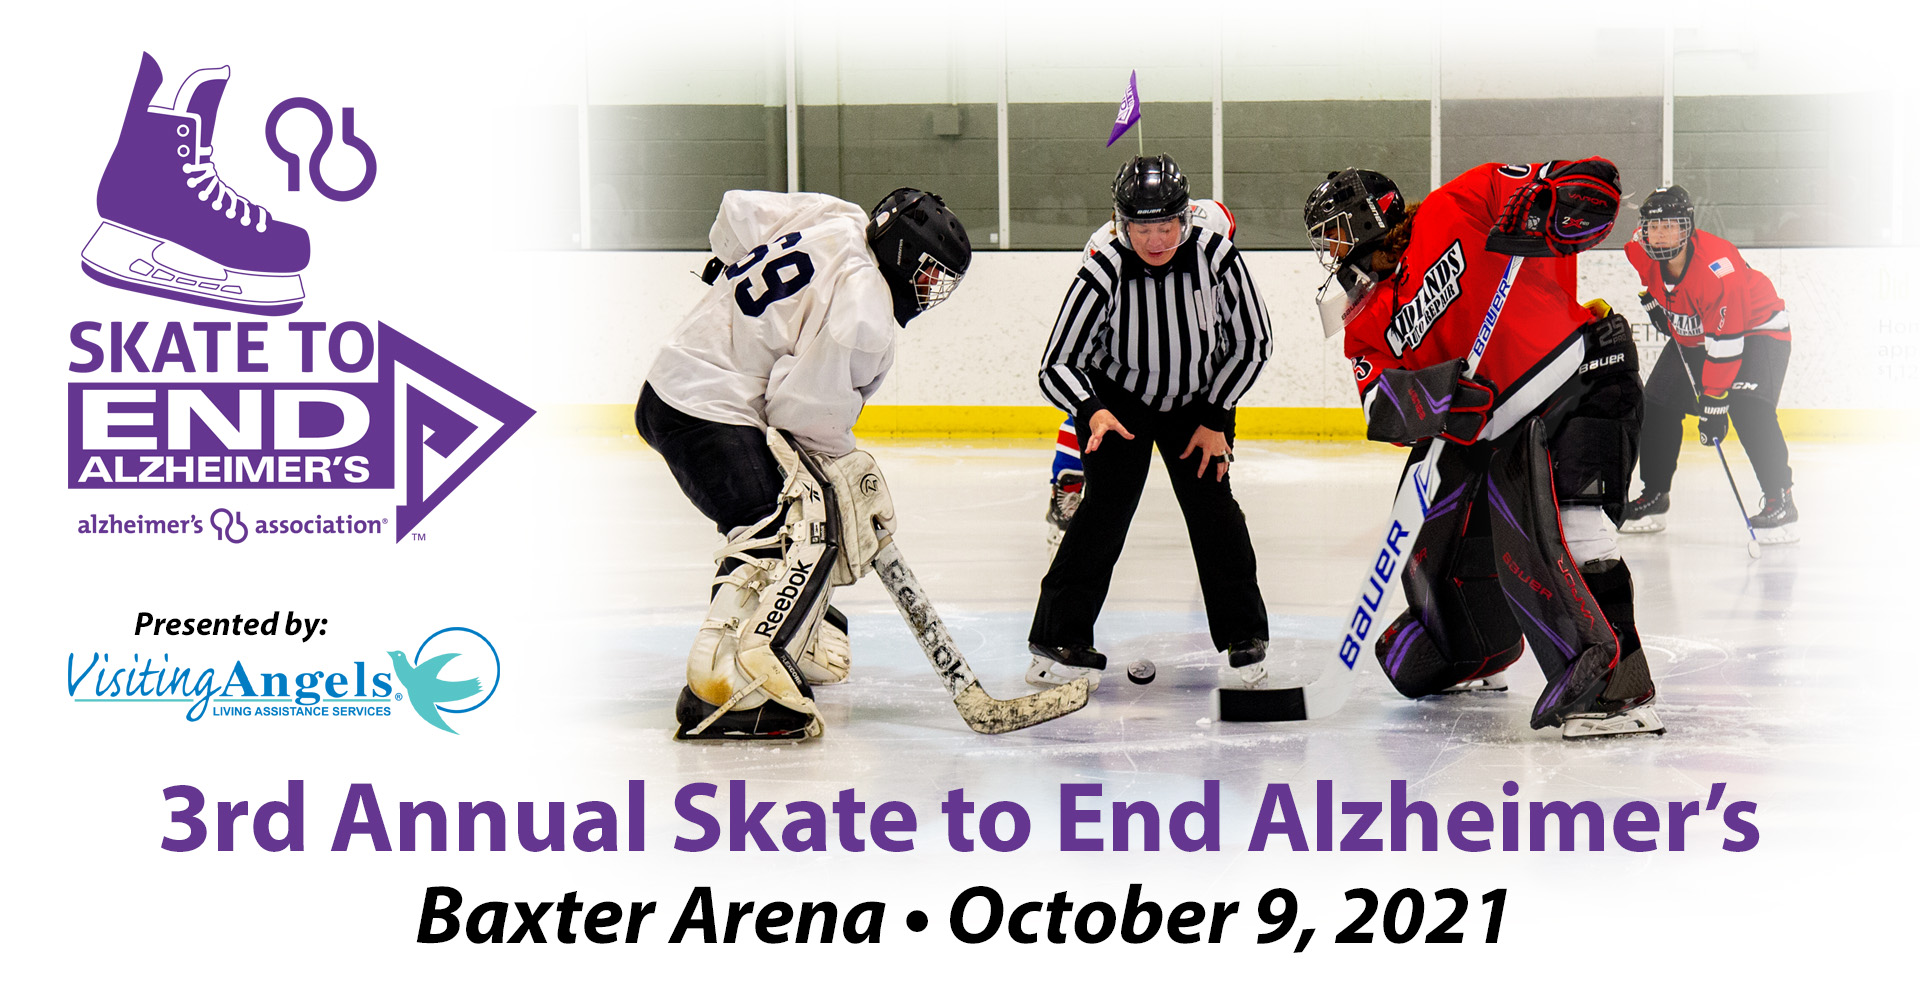 Join in the Fight to END Alzheimer’s!